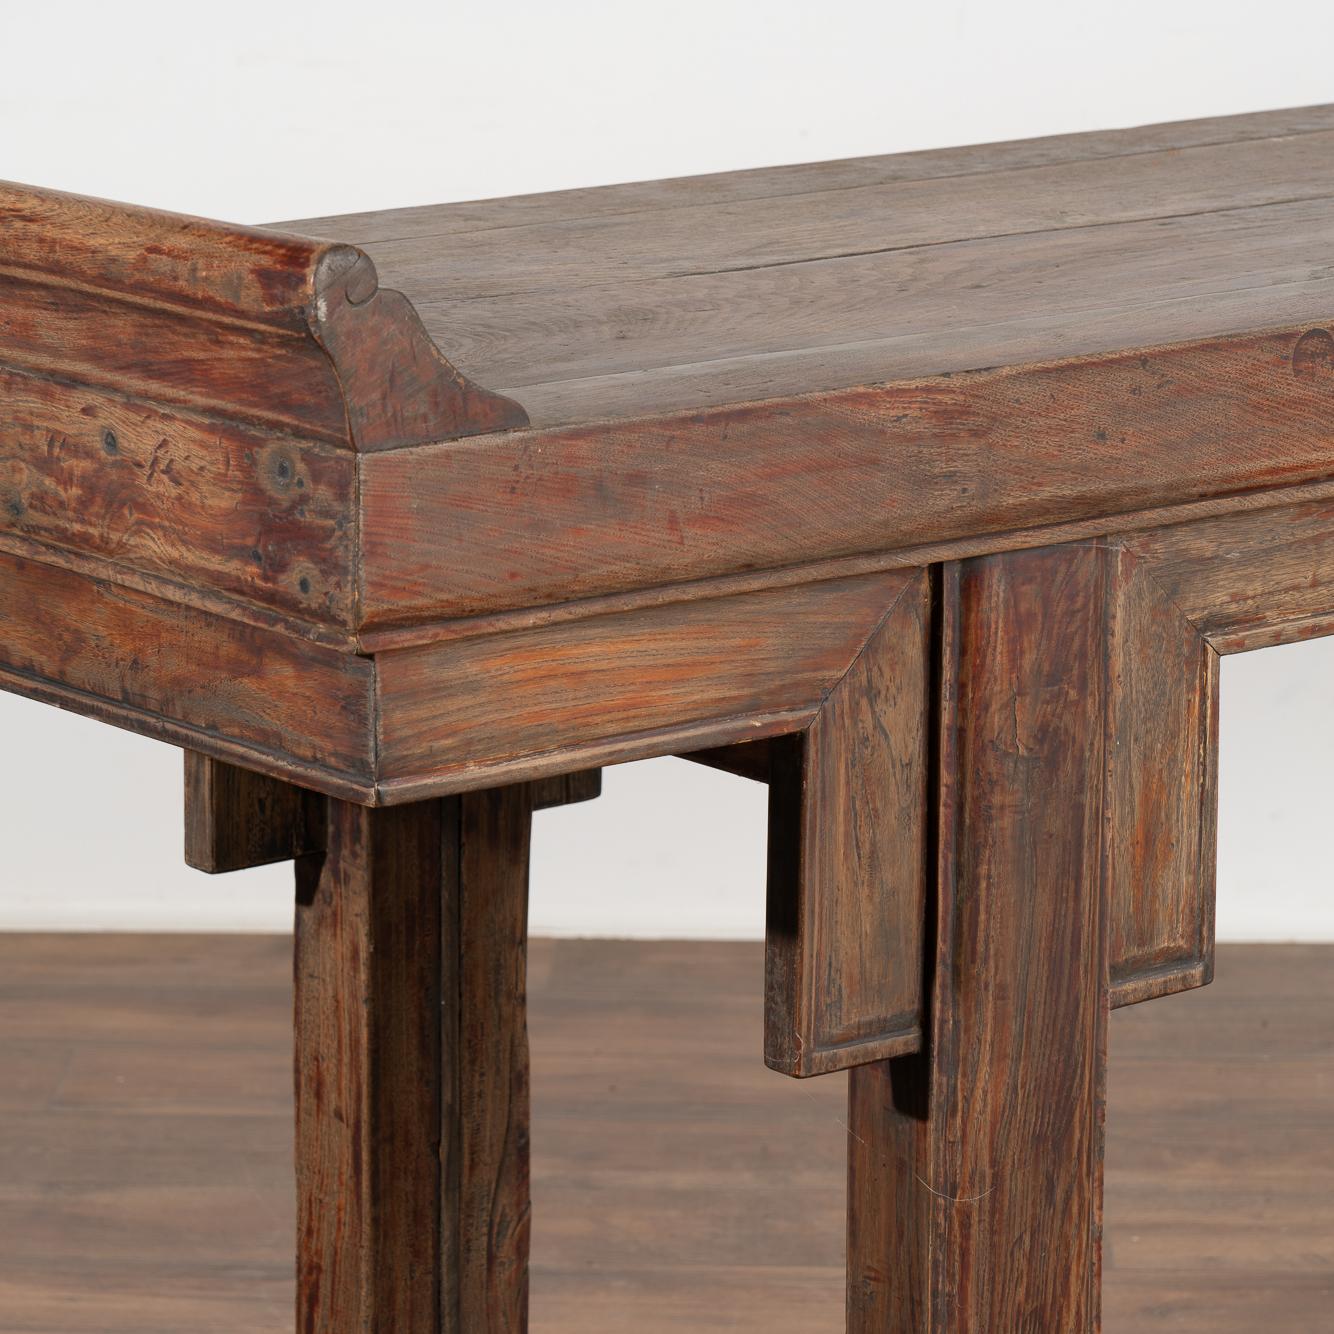 18th Century Long Antique Chinese Console Table Alter Table, circa 1780-1800